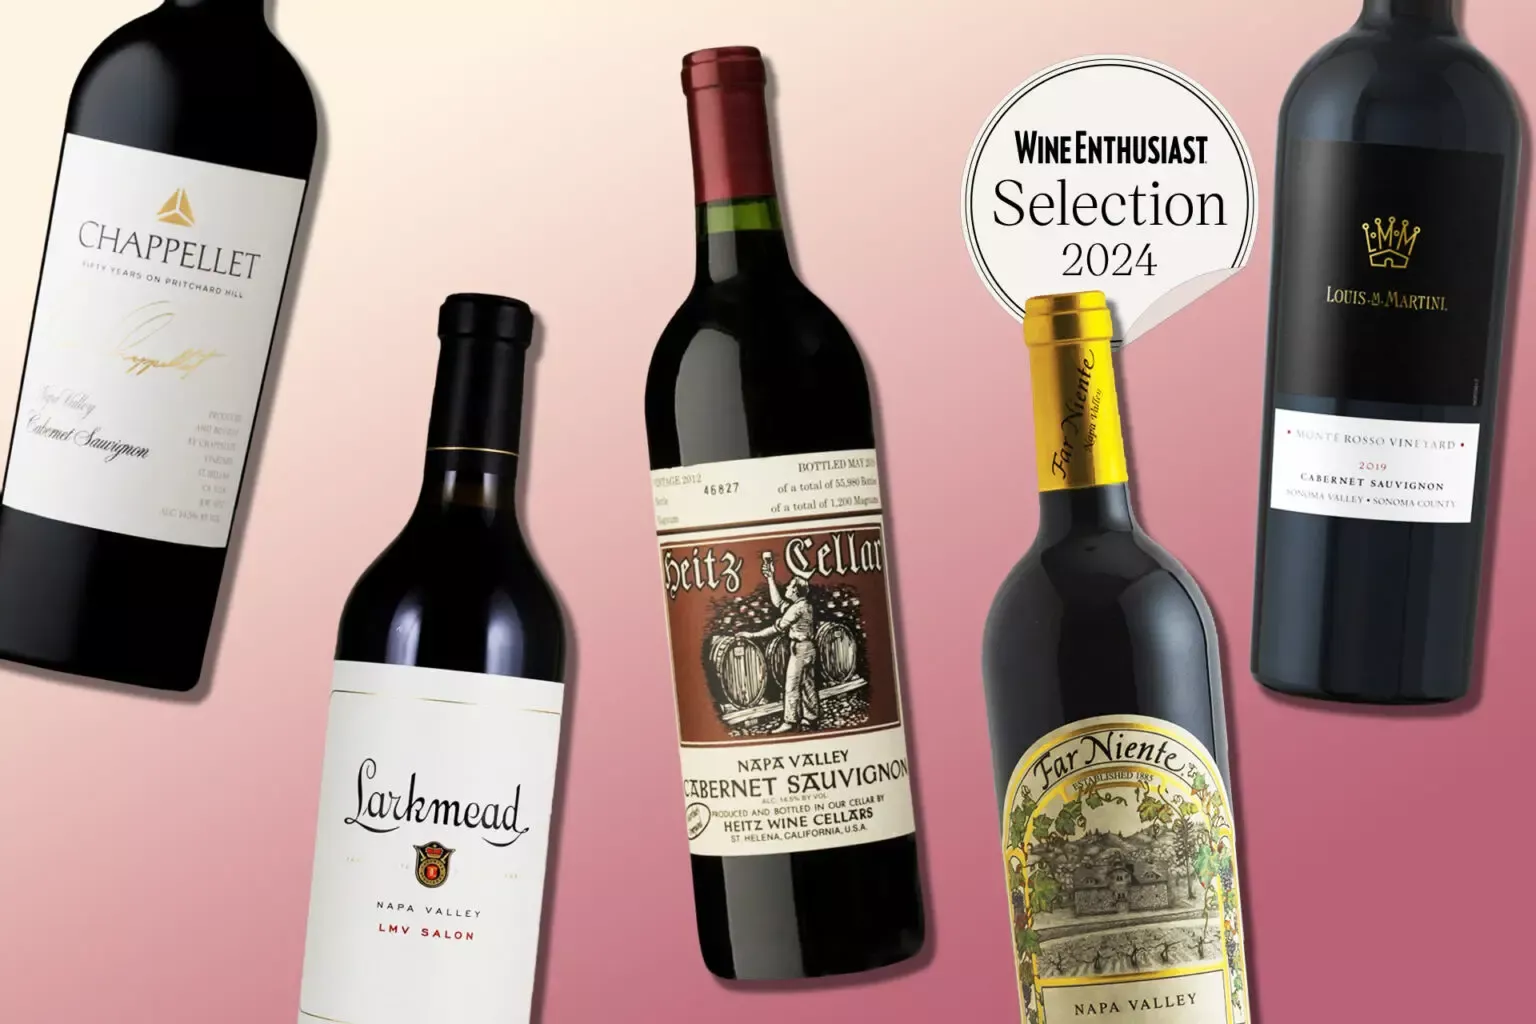 02 24 The Best Napa Cabernet Sauvignons to Drink Right Now HERO Wine com Total Wine Louis M Martini 1920x1280 1536x1024